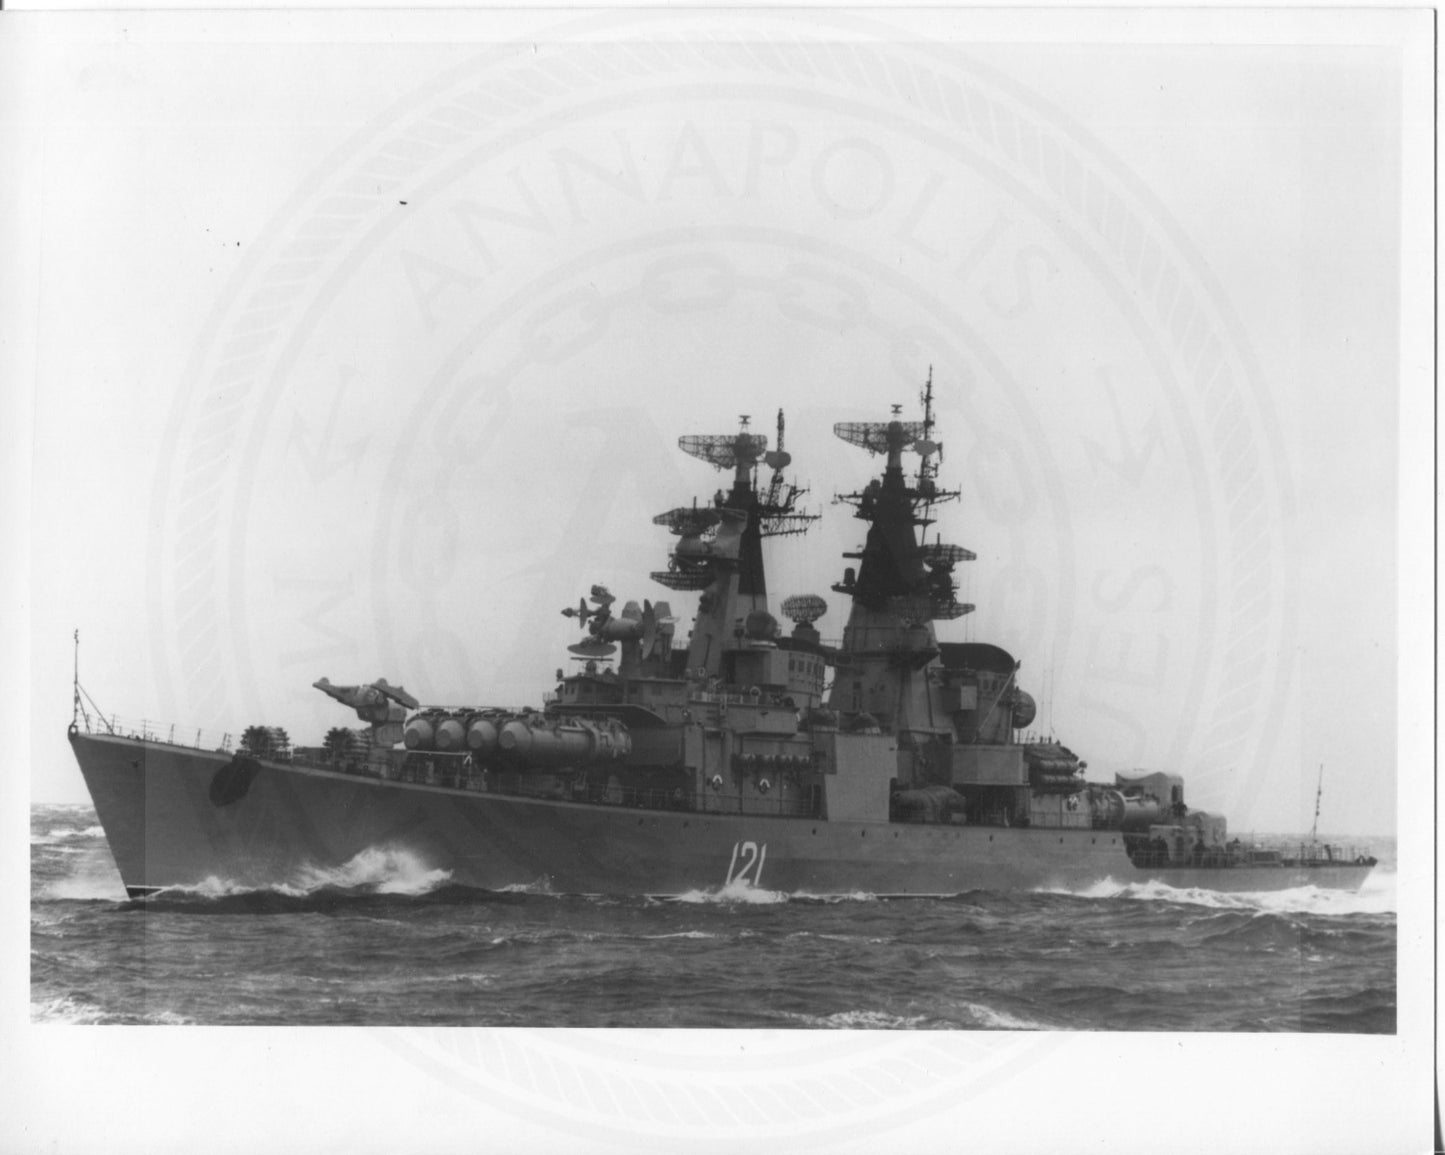 Official U.S. Navy photo the Soviet missile cruiser Kynda class - Annapolis Maritime Antiques